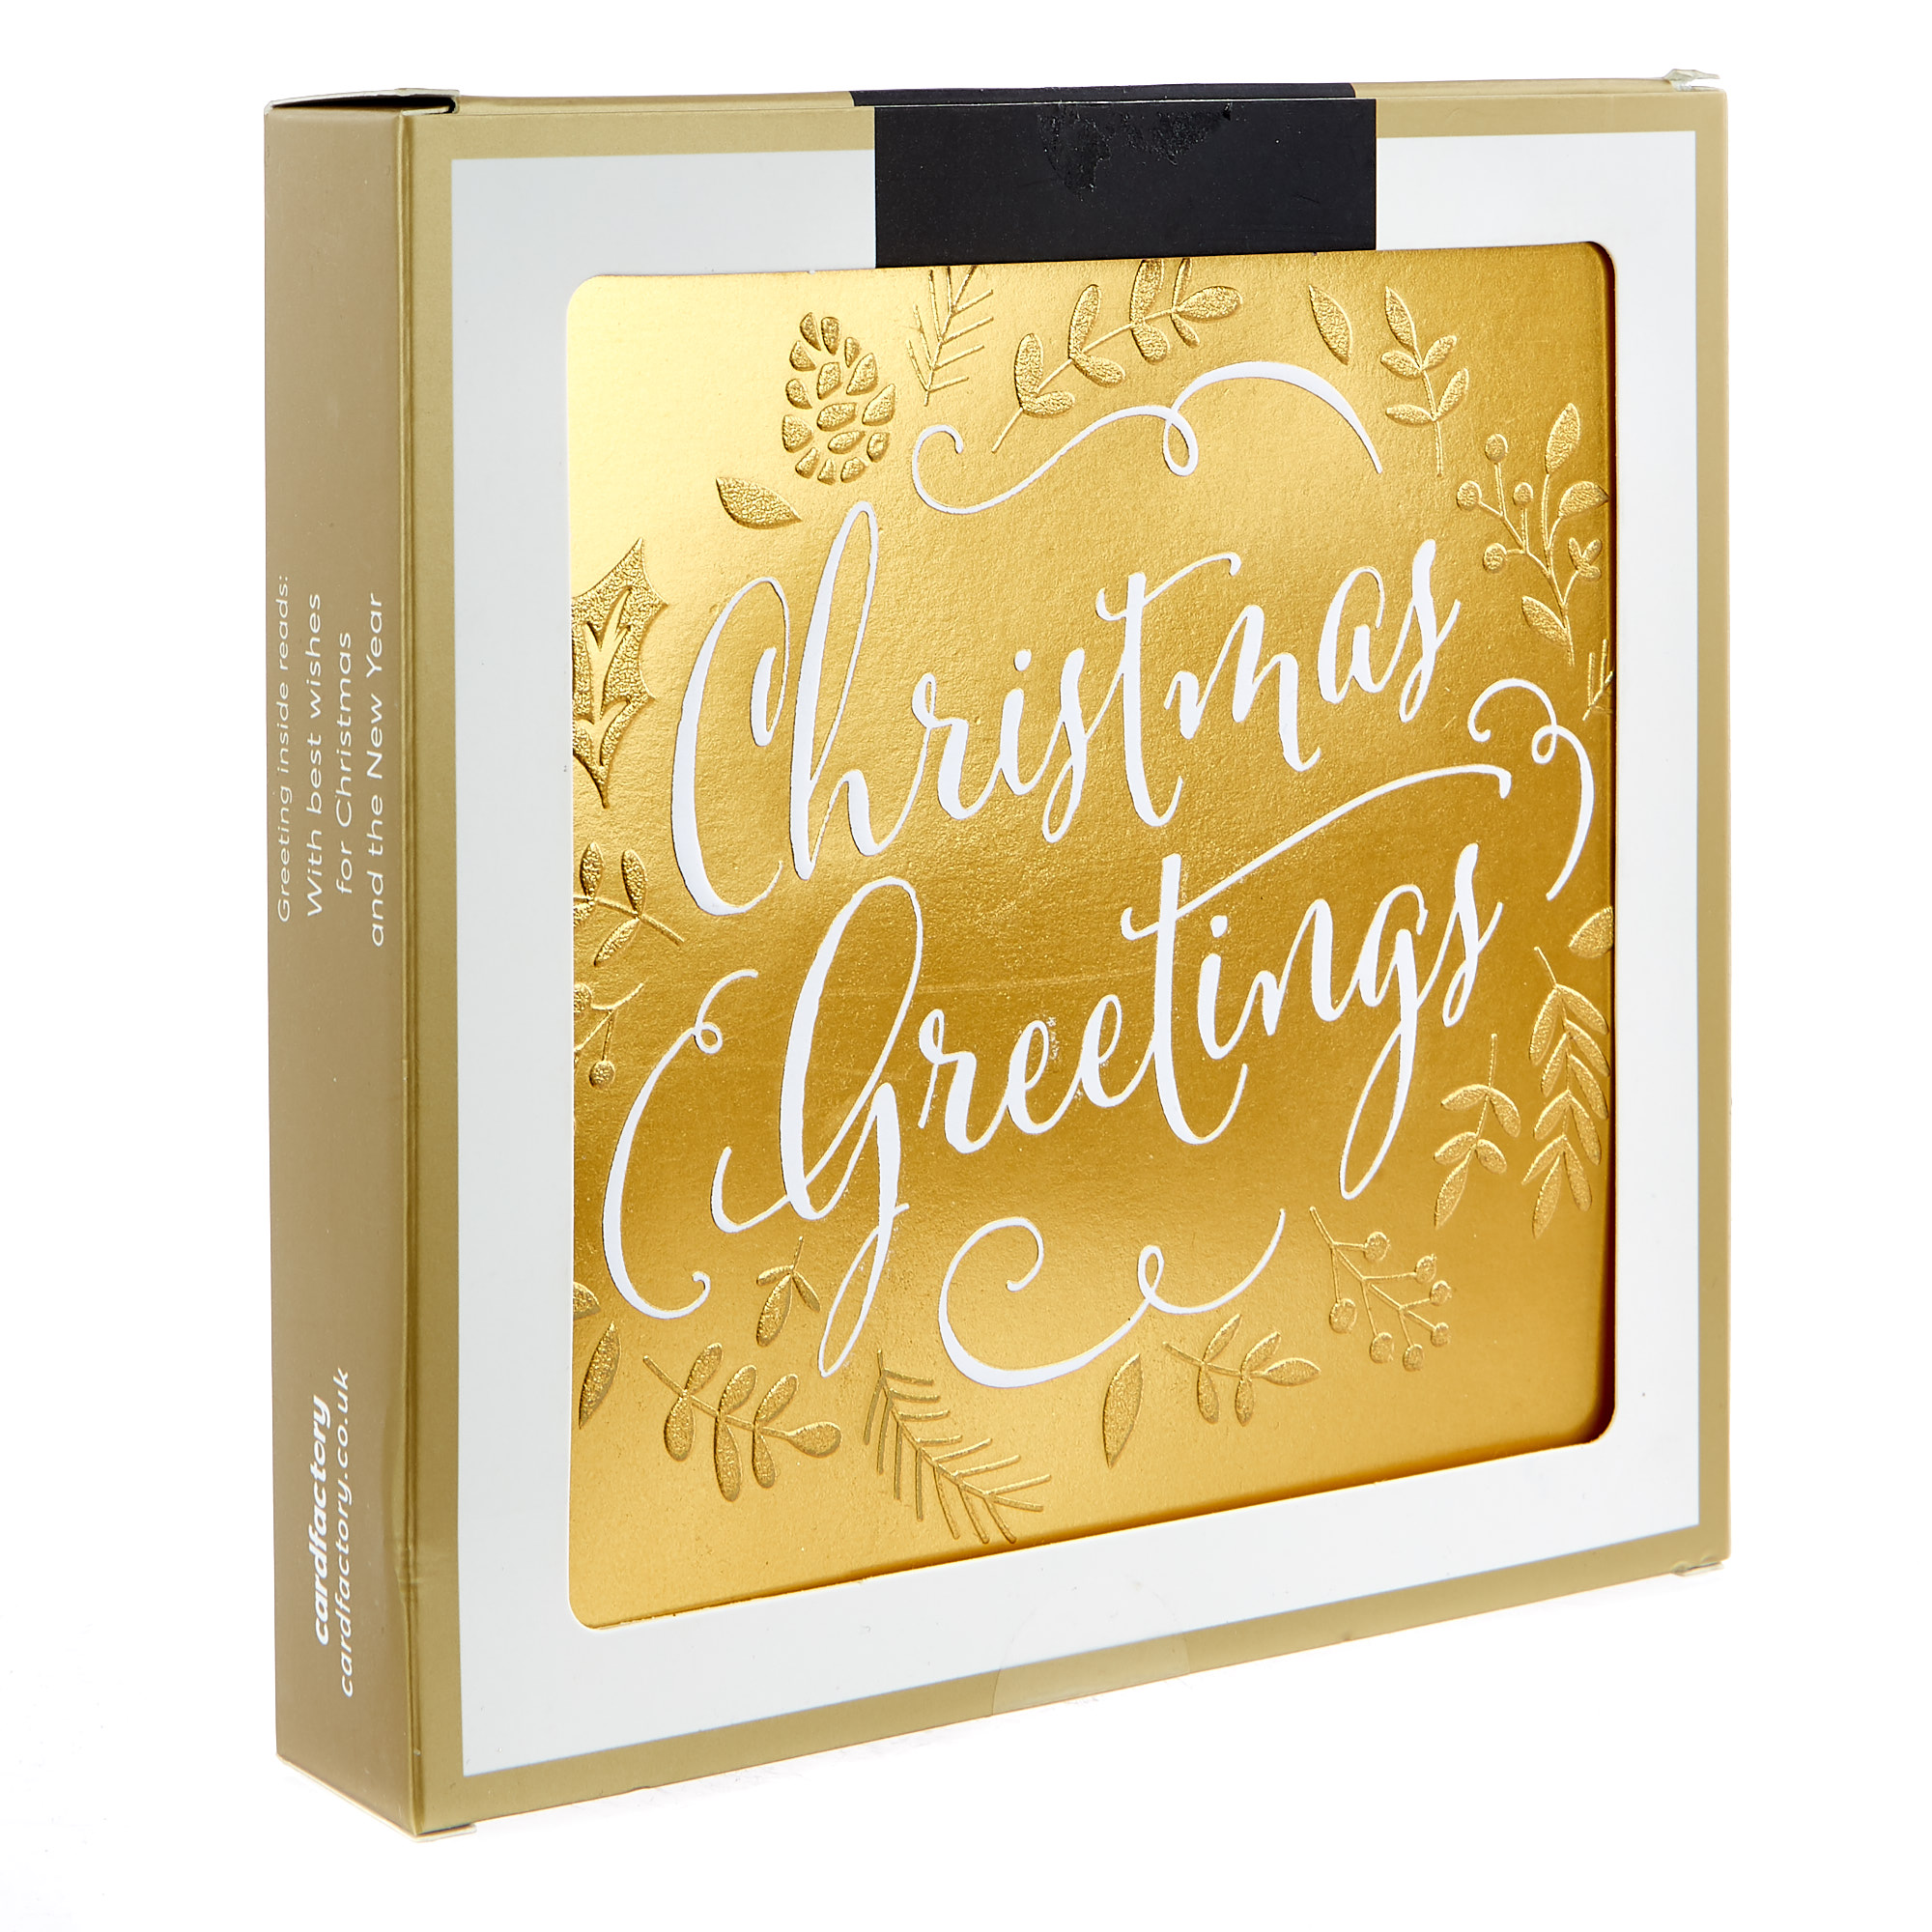 Charity Christmas Cards - Red & Gold (Pack of 16) 